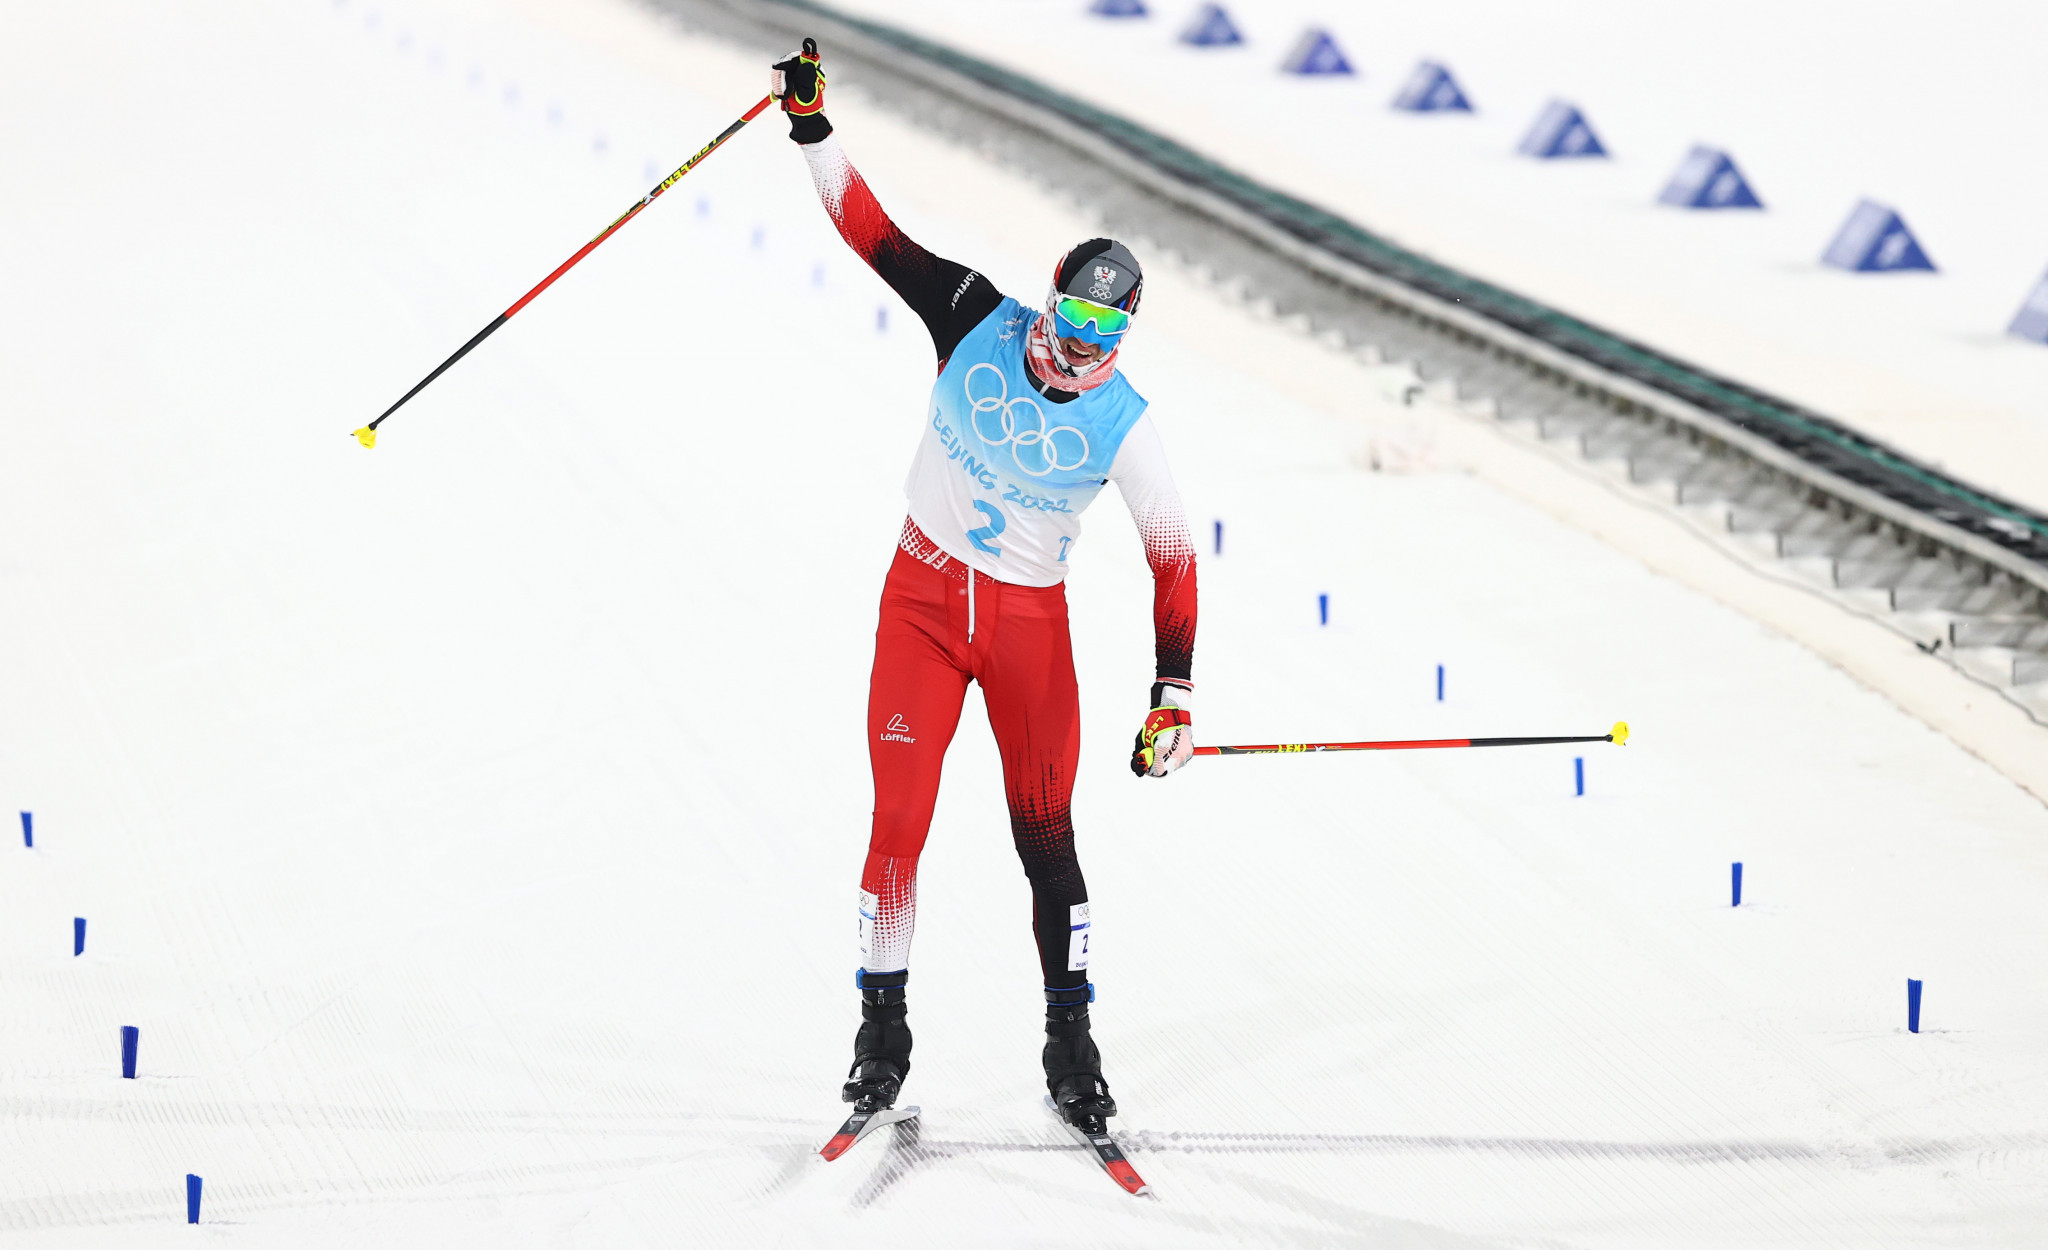 Norway's Jørgen Nyland Graabak claimed the silver medal ©Getty Images